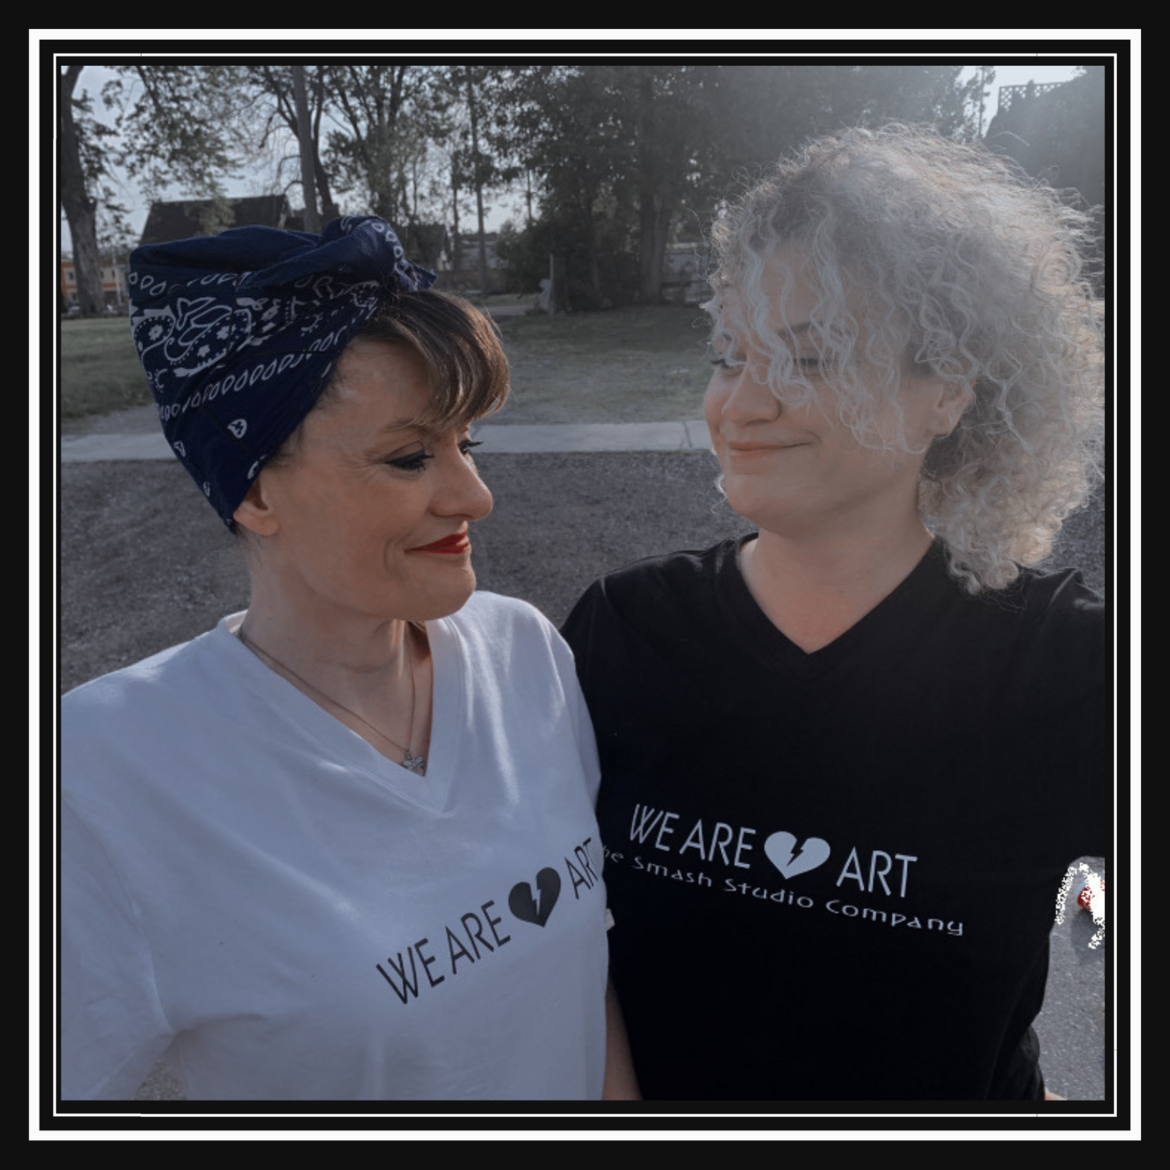 Smash Studio Co branded Tee shirts modelled by mad artists. We go to those in active addiction in order to make the project accessible so we can monetize their contributions, building motivation from confidence of trusted integrity and bonds fo